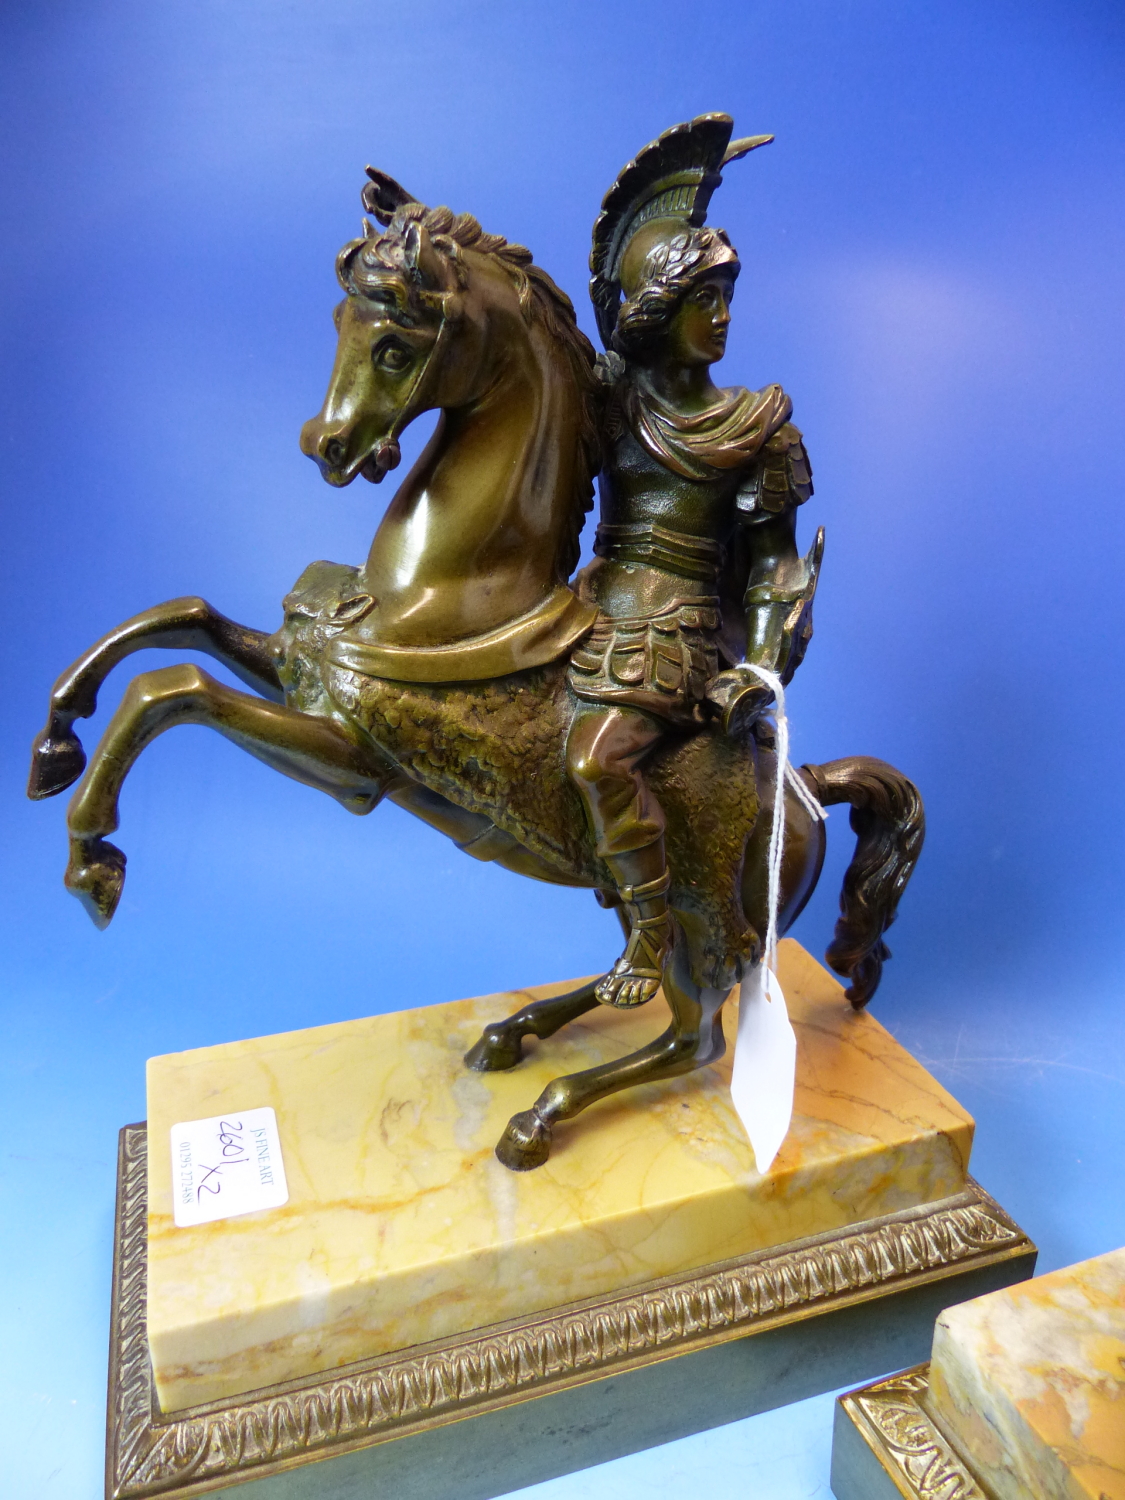 A PAIR OF 19th.CENTURY EQUESTRIAN BRONZES OF A COSSACK AND A ROMAN SOLDIER, THEIR HORSES REARING ON - Image 3 of 20